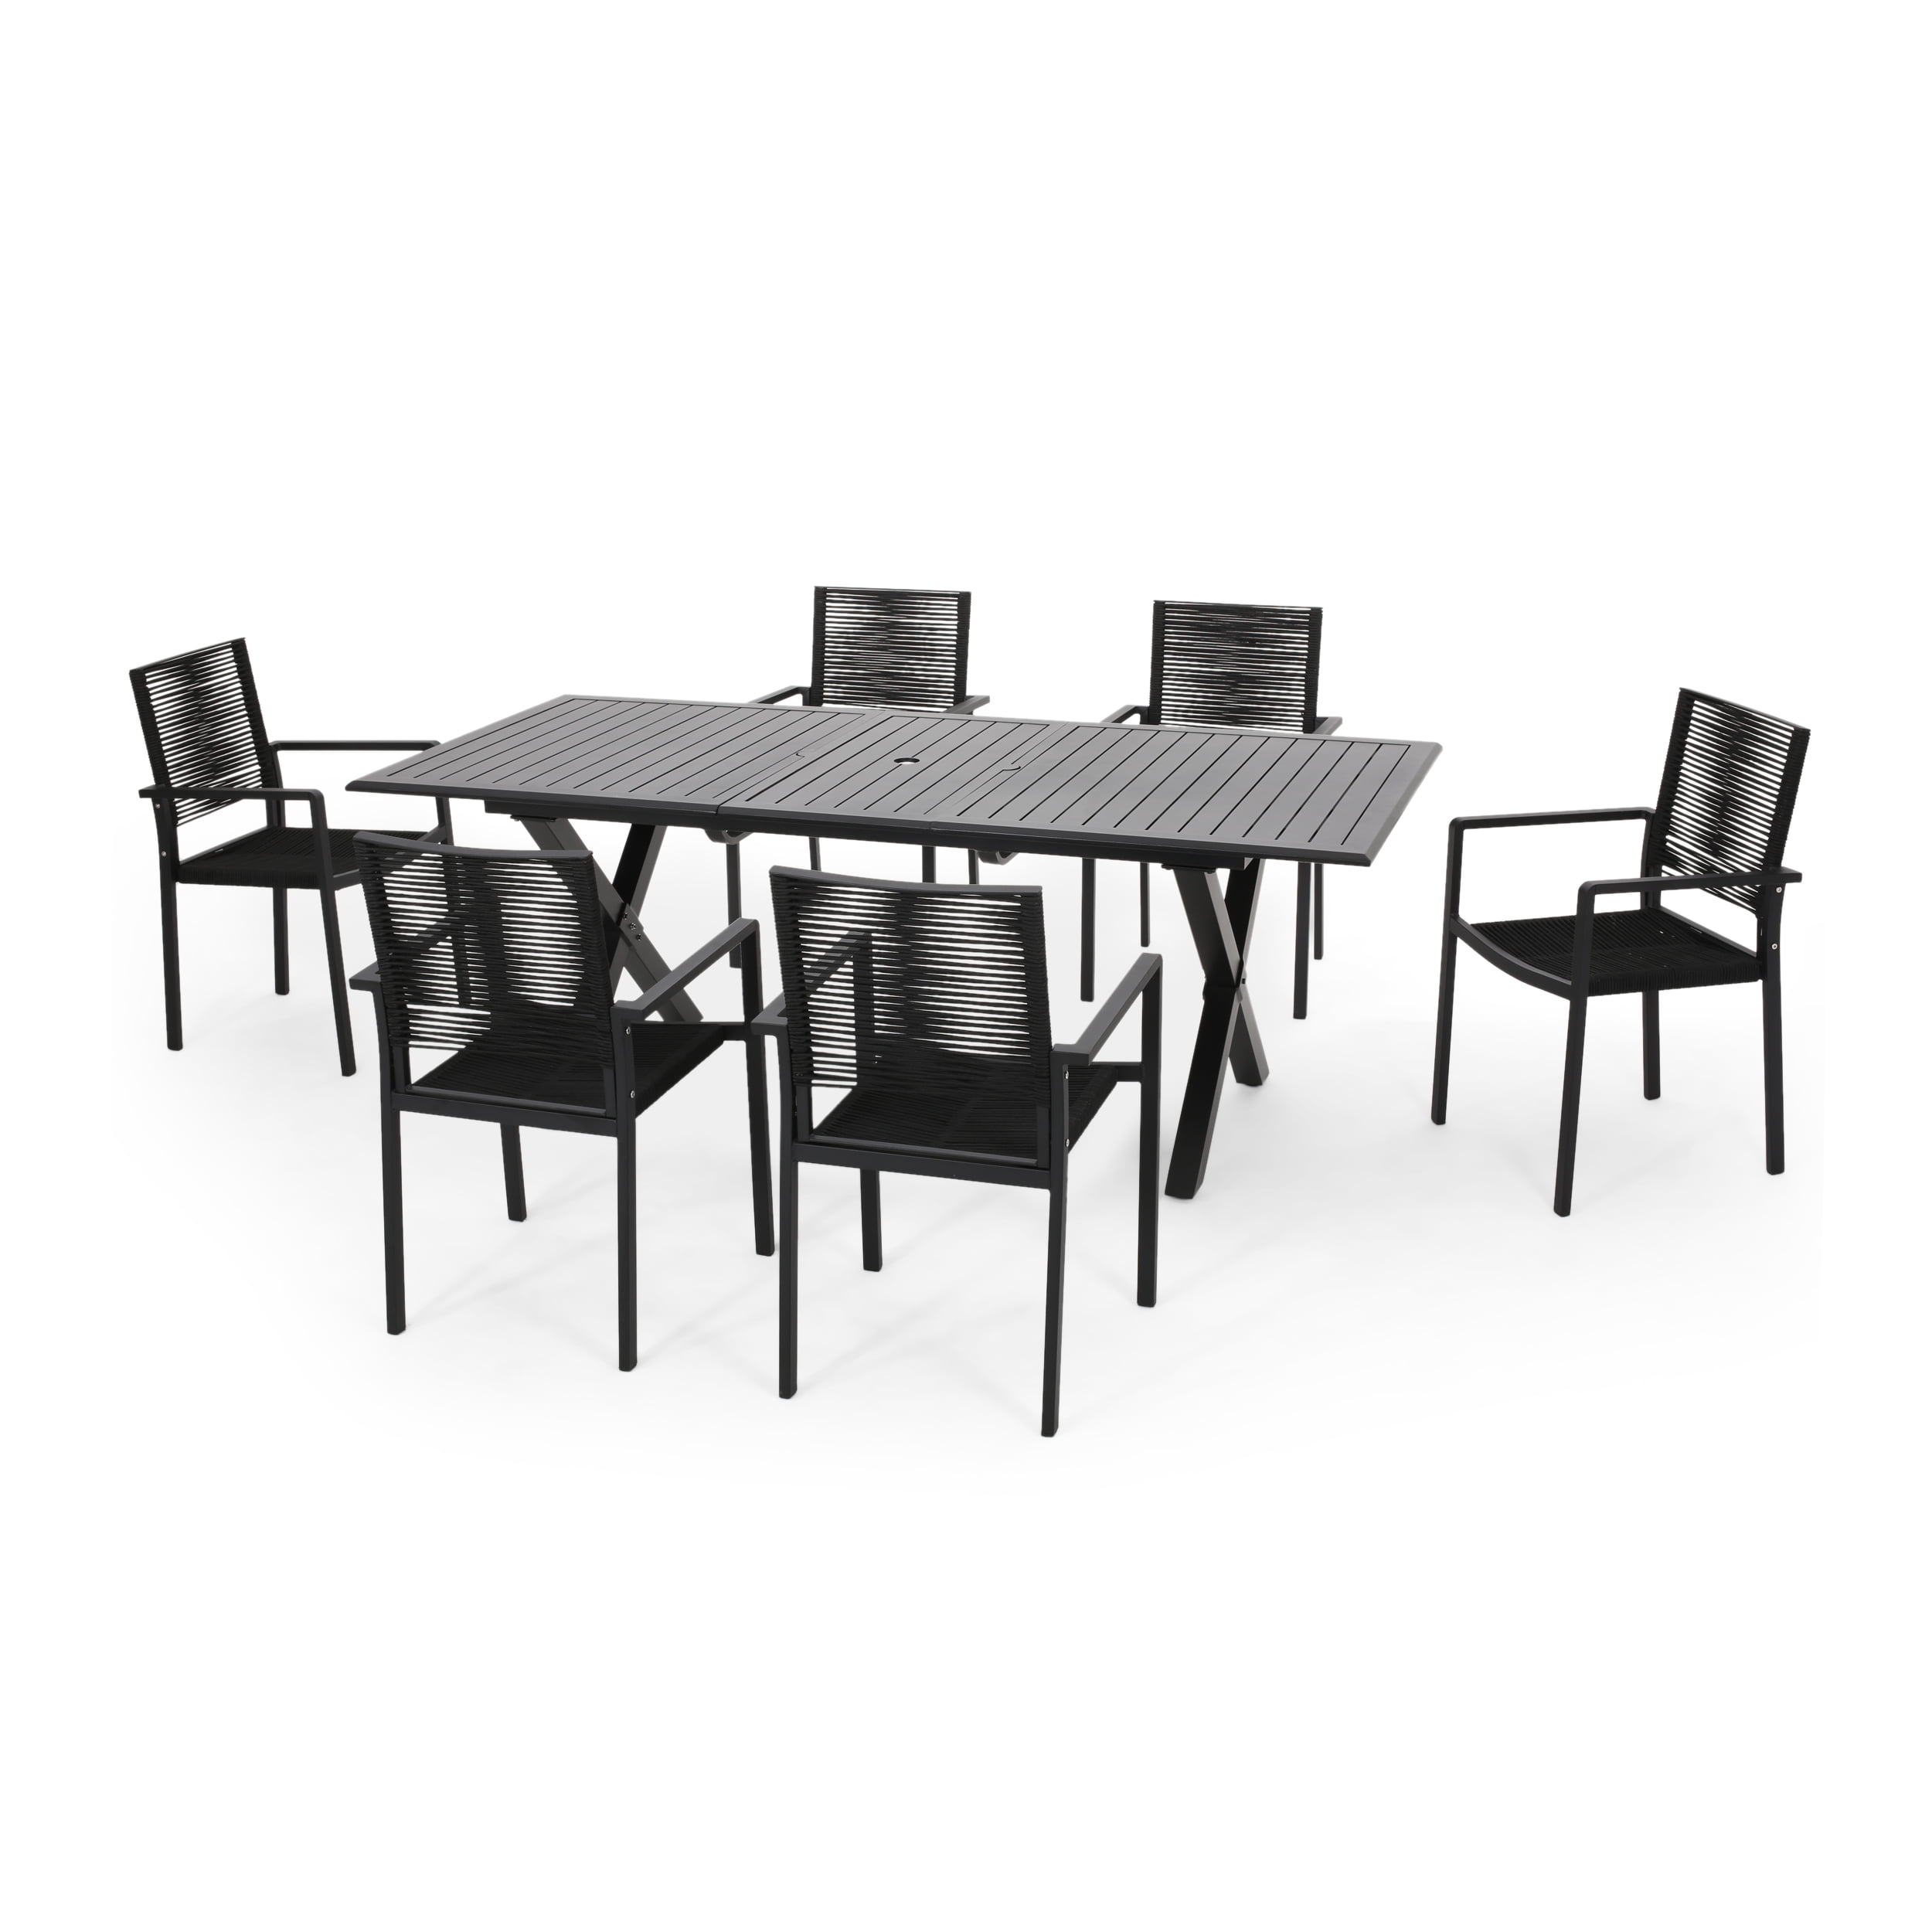 Layni Outdoor Modern 6 Seater Aluminum, Modern Outdoor Dining Set For 6